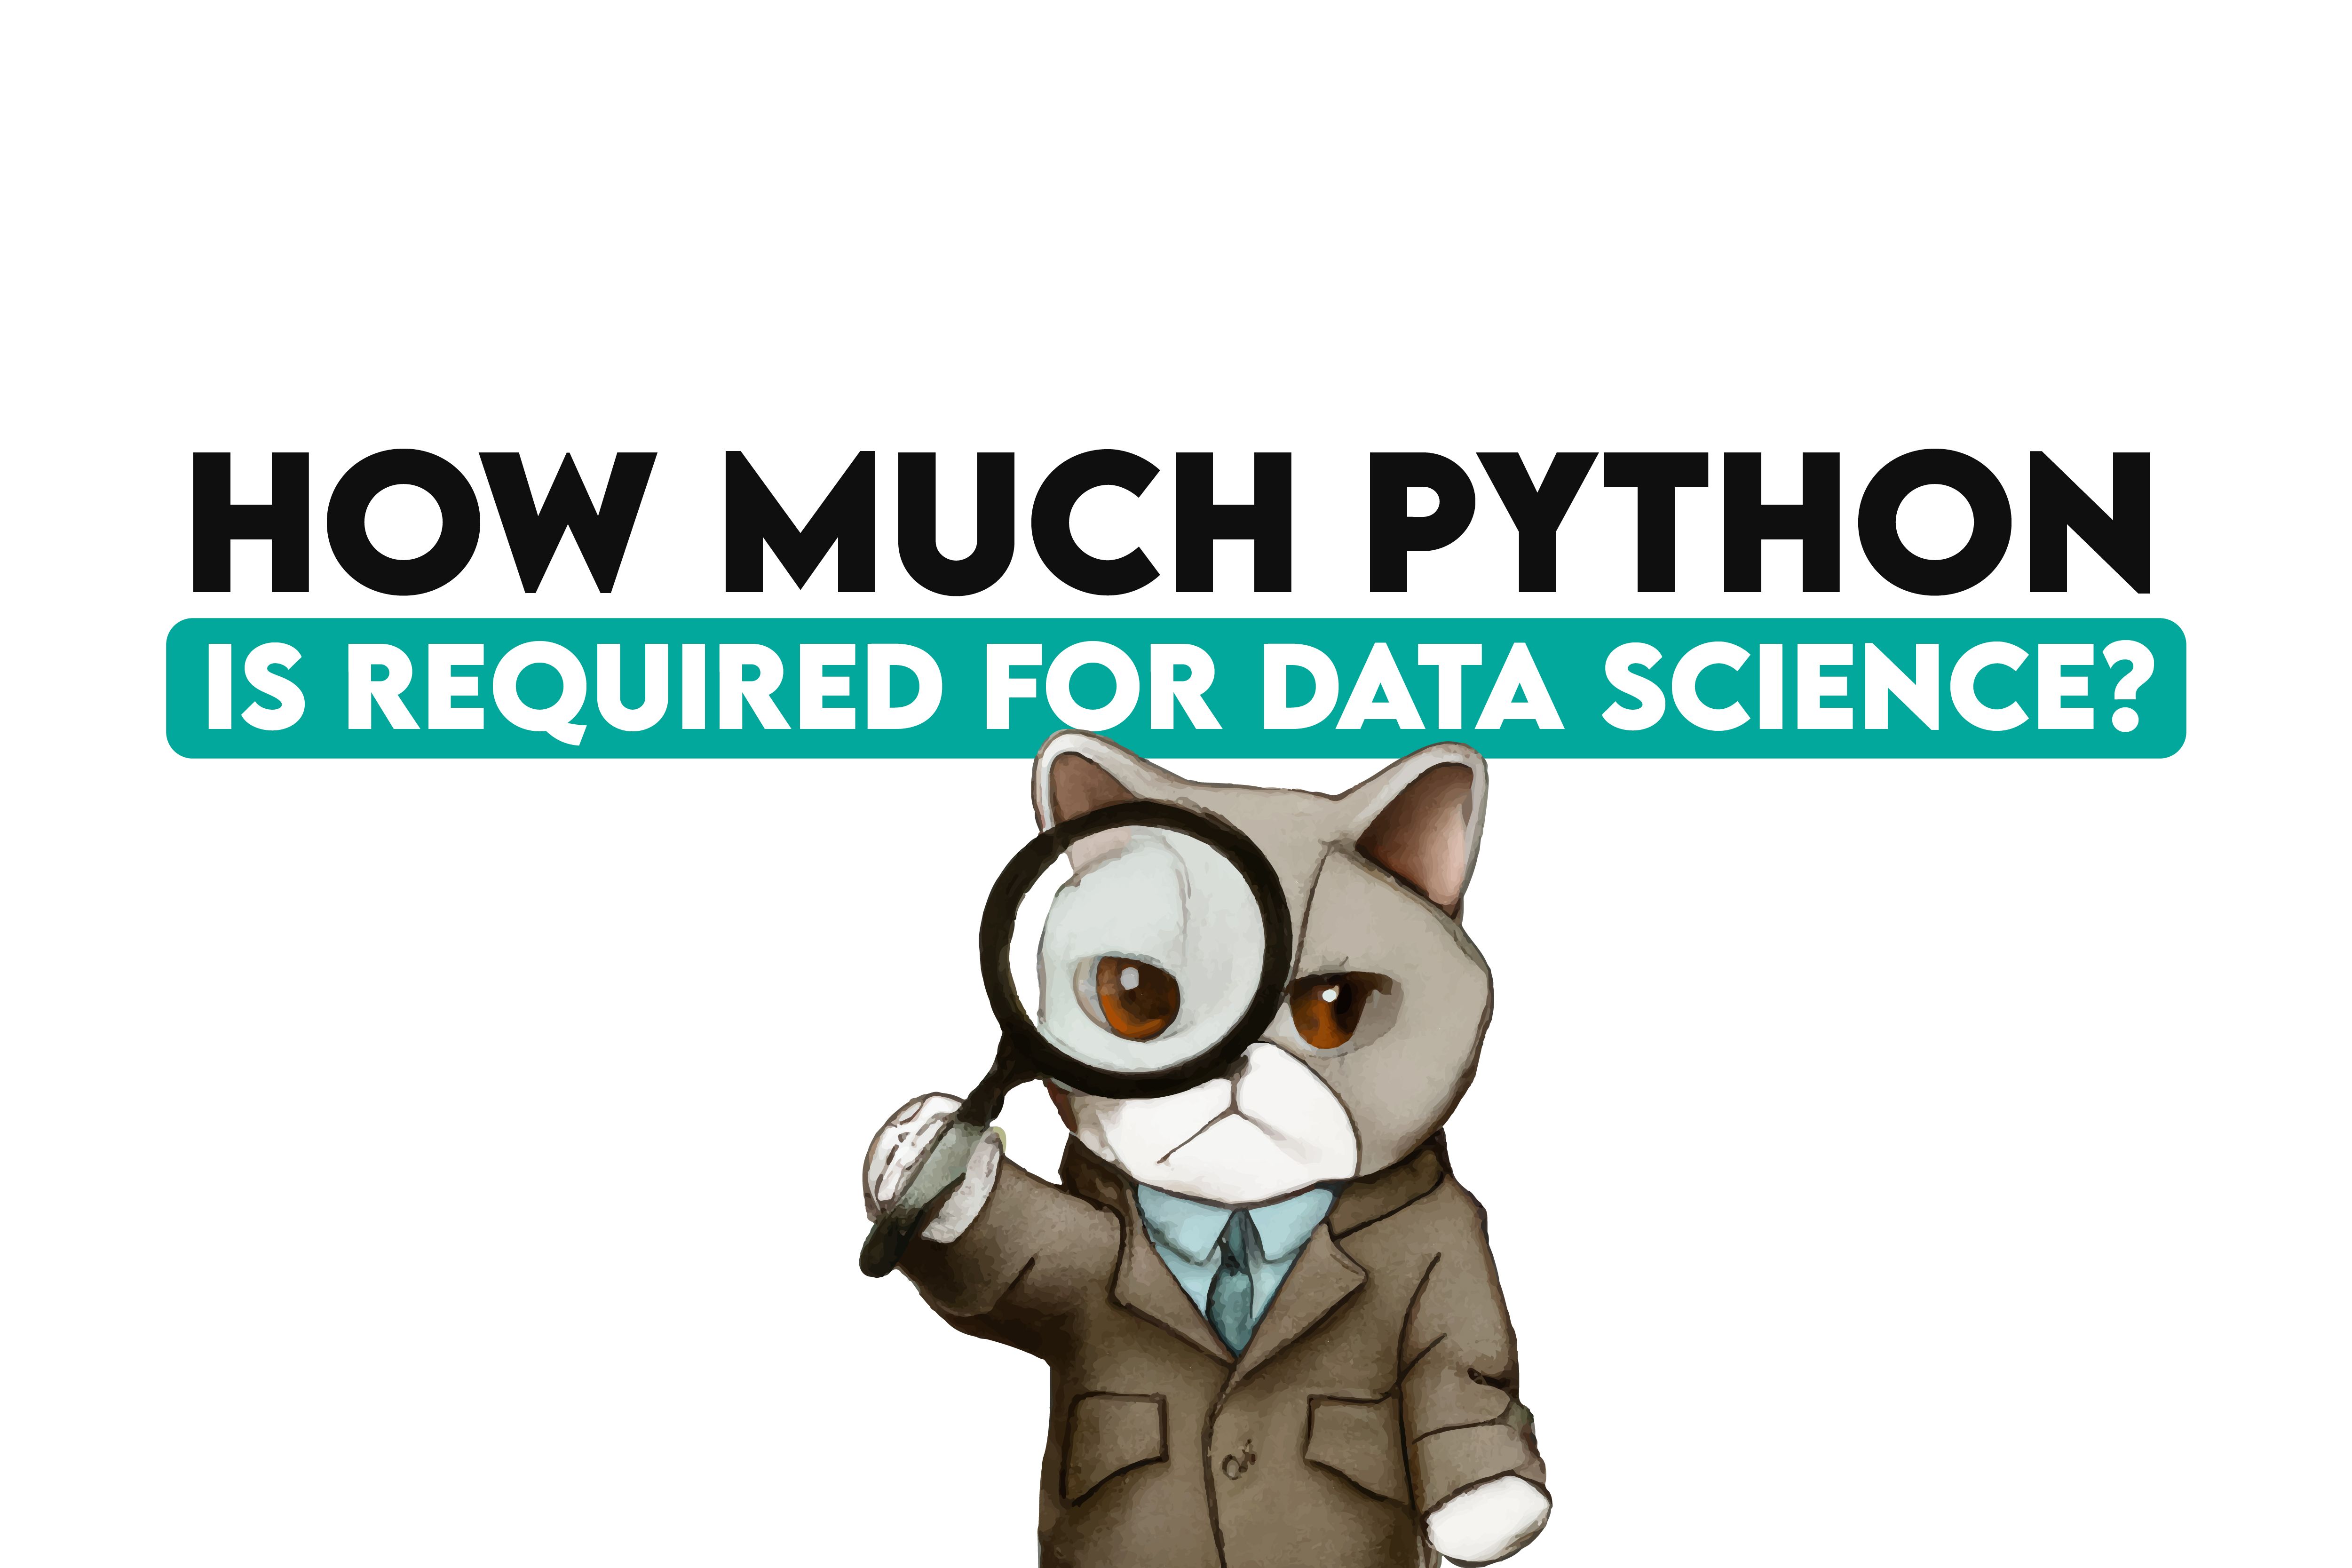 How Much Python is Required for Data Science